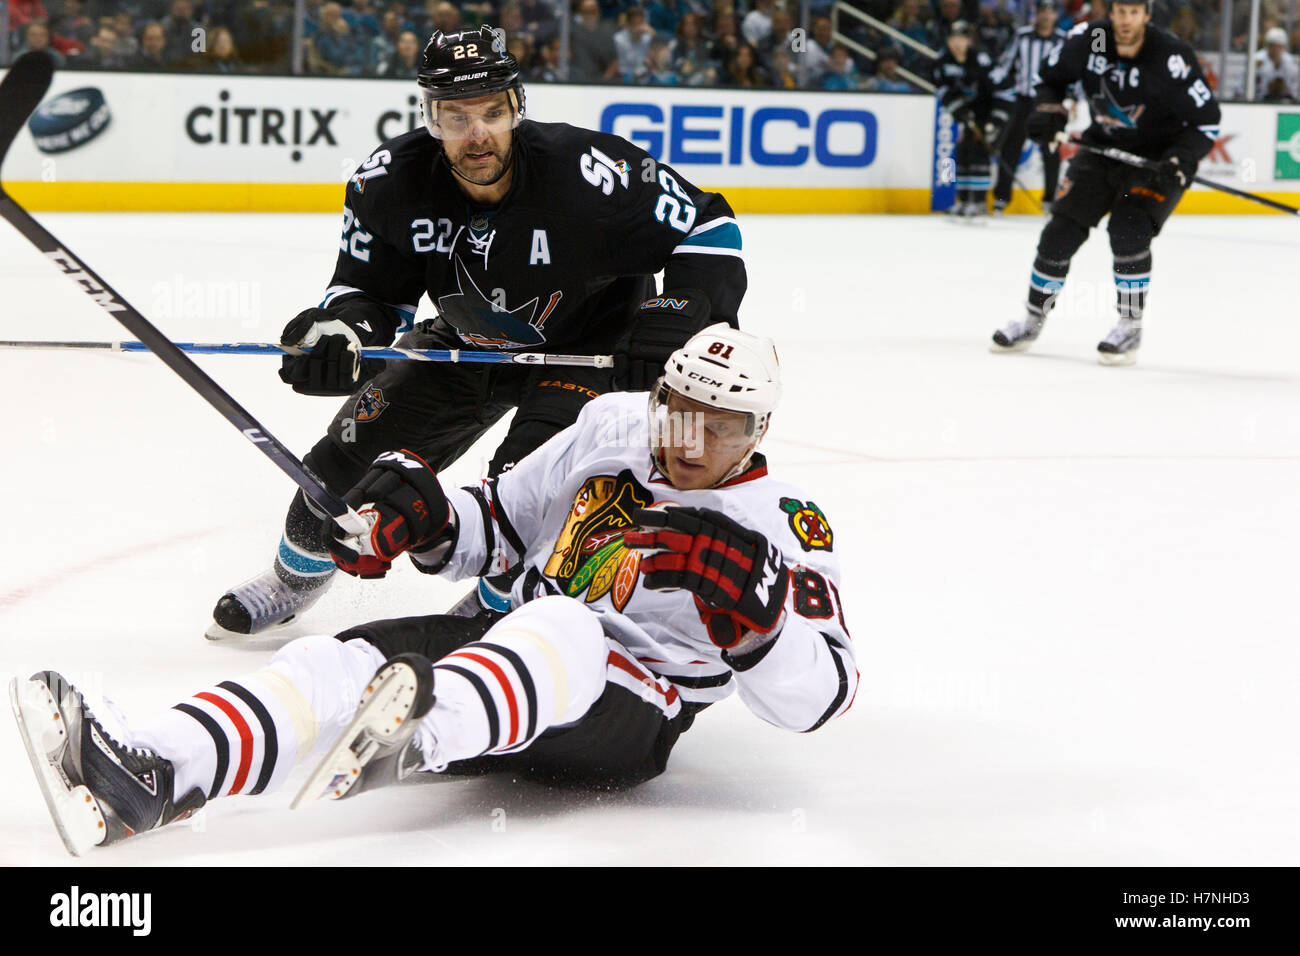 Feb 10, 2012; San Jose, CA, USA; Chicago Blackhawks right wing Marian Hossa (81) is knocked to the ice by San Jose Sharks defenseman Dan Boyle (22) during the second period at HP Pavilion. Stock Photo